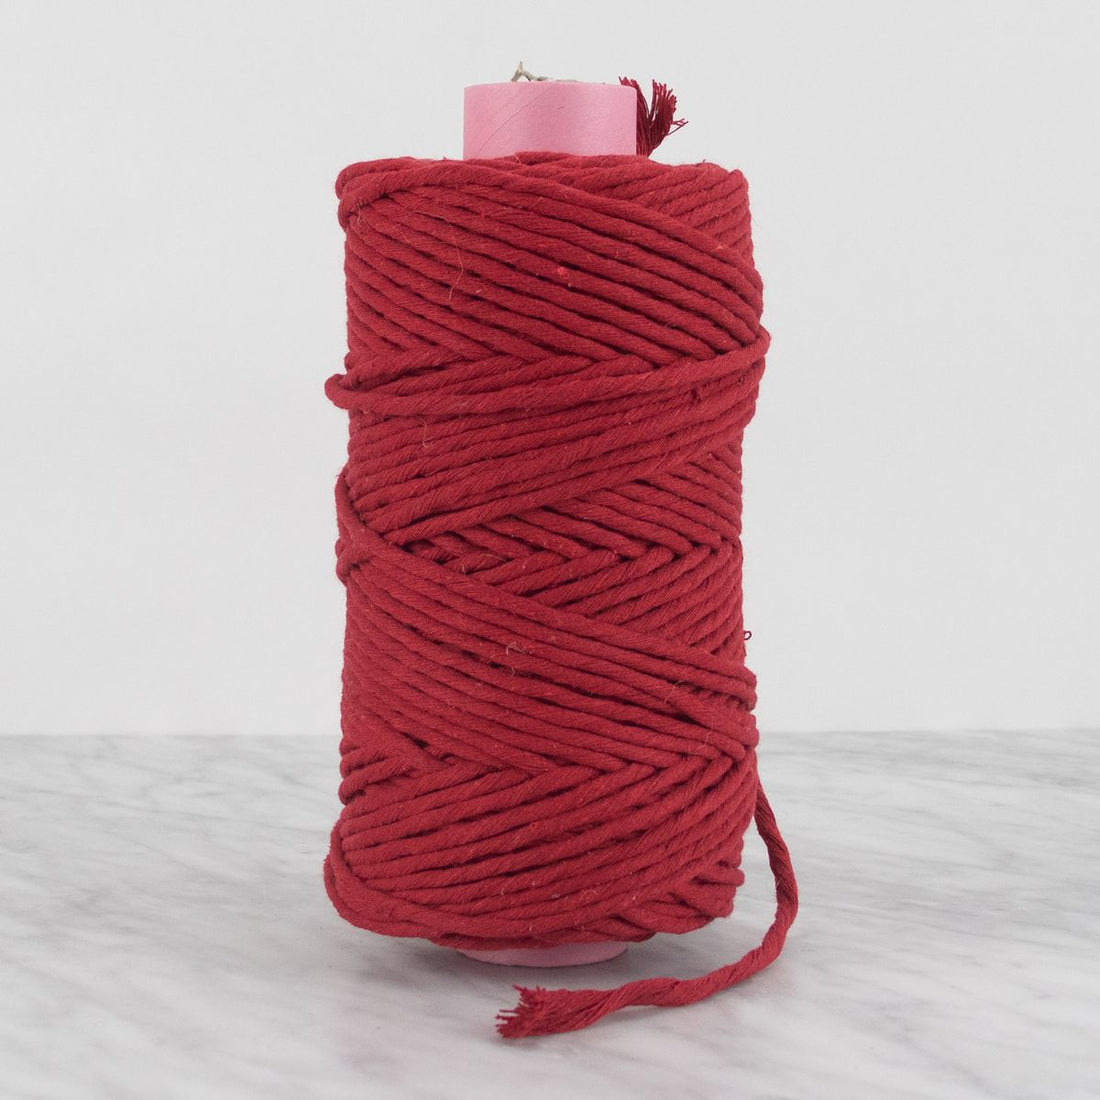 5 mm Recycled Cotton String 0.5 kg - Cherry